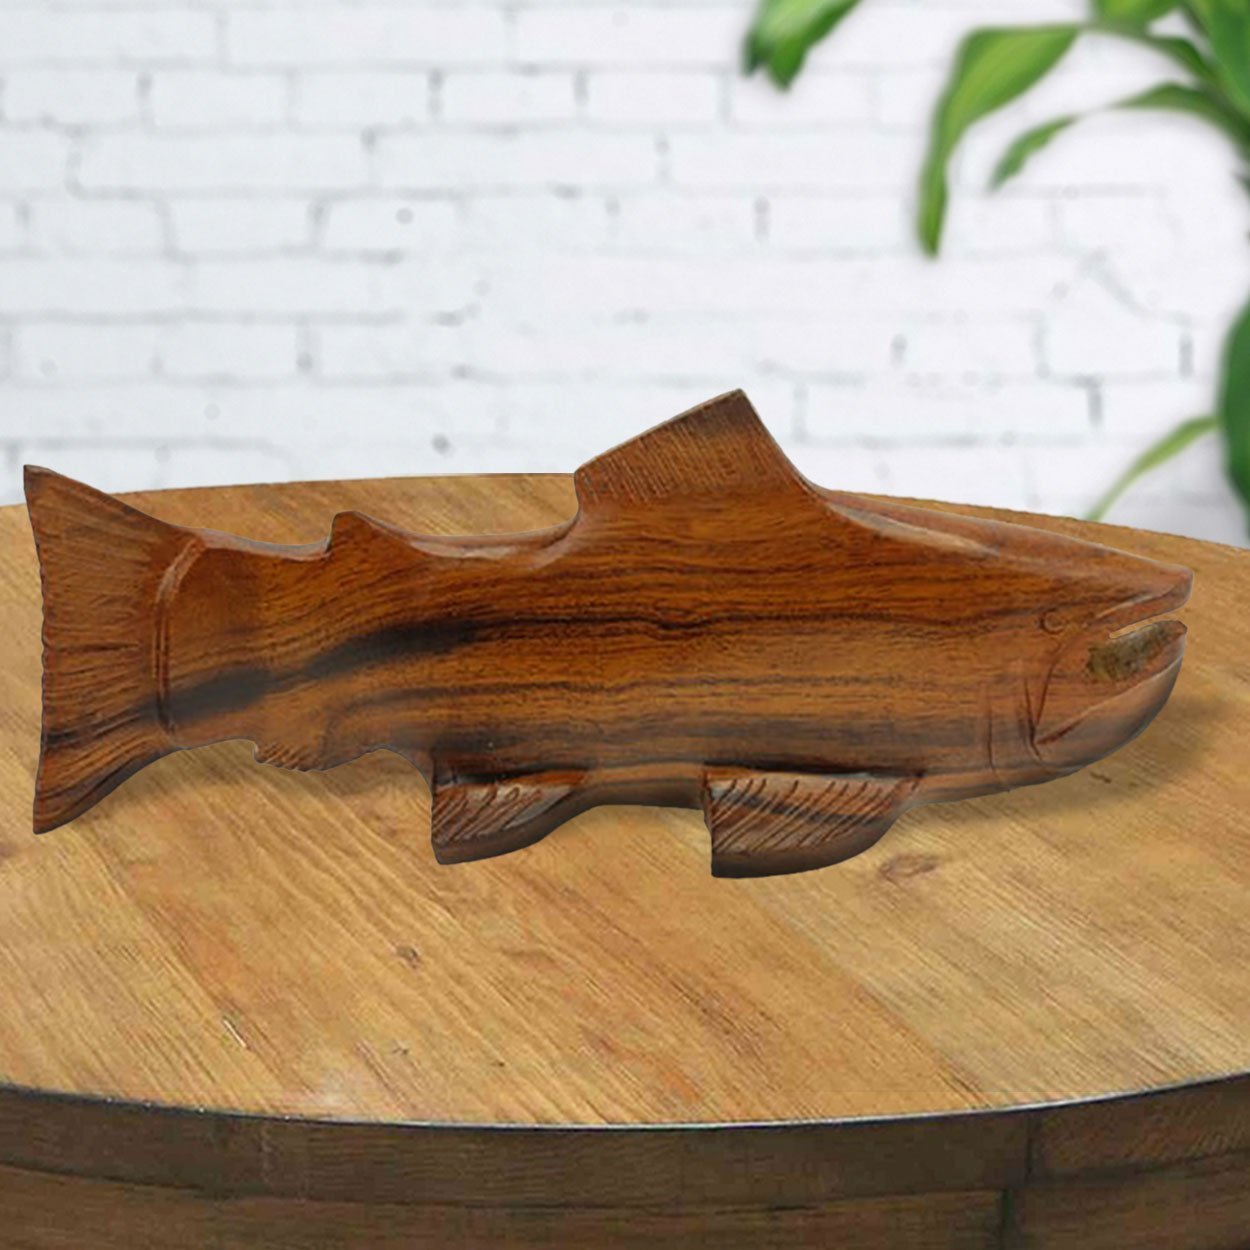 172207 - 9in Long Trout Ironwood Carving